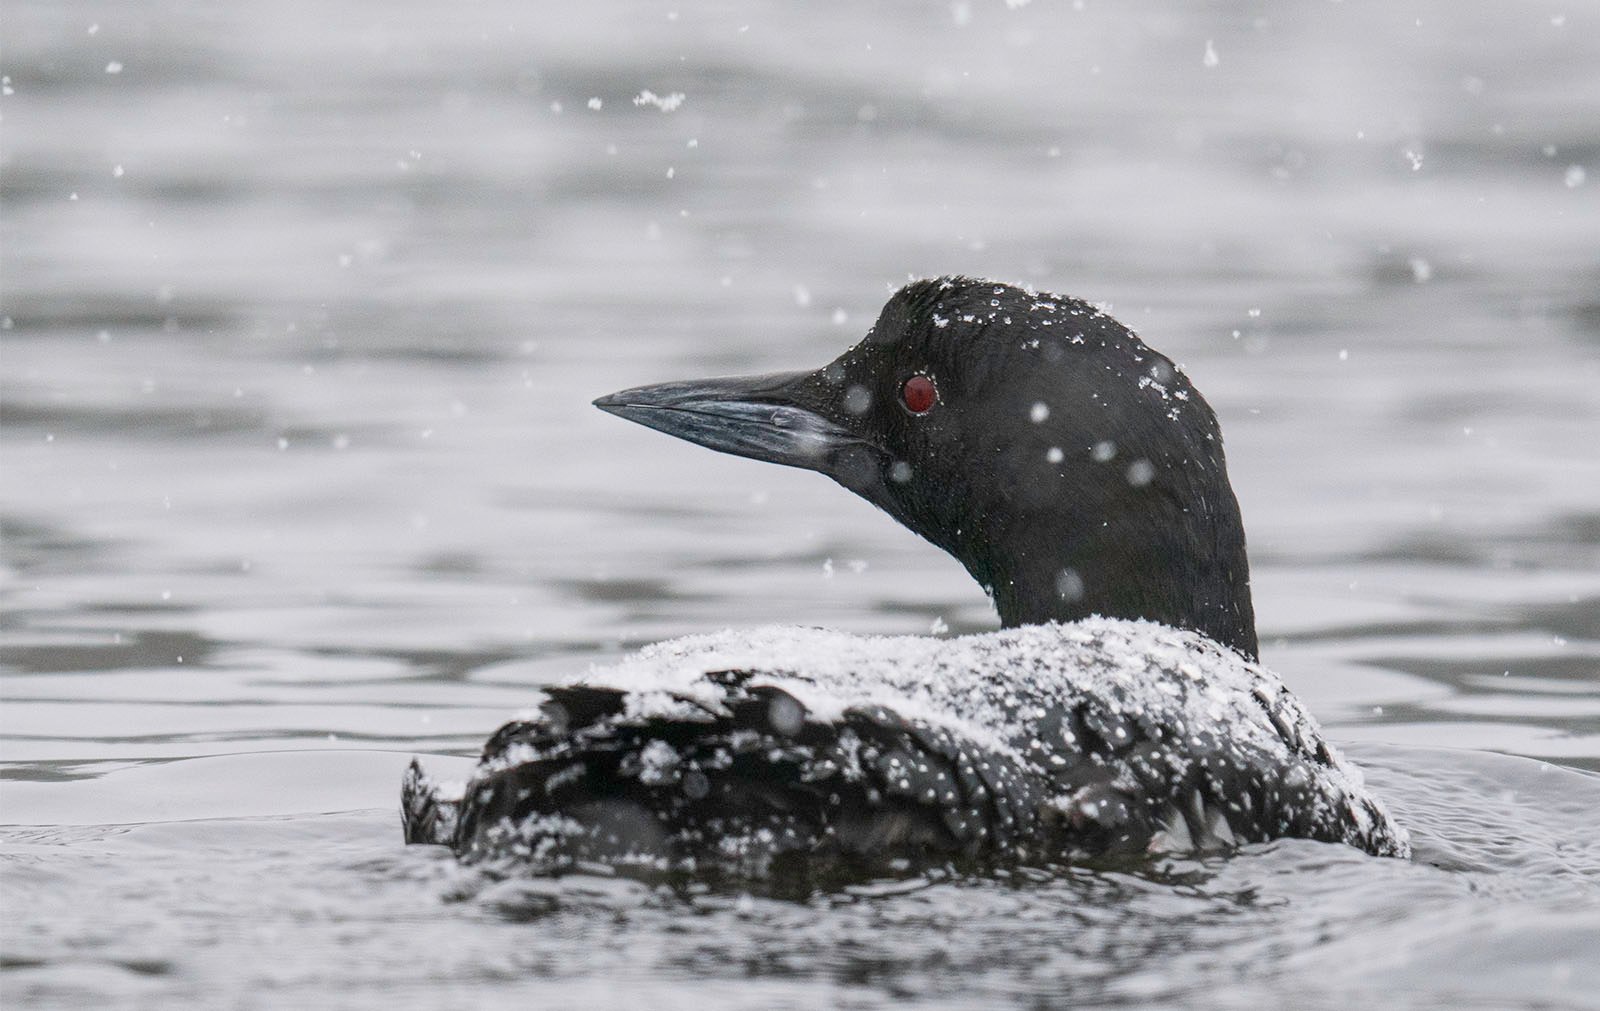 A common loon with striking red eyes surfaces on a wintry lake, its black feathers dusted with light snowflakes, against a backdrop of blurred falling snow.